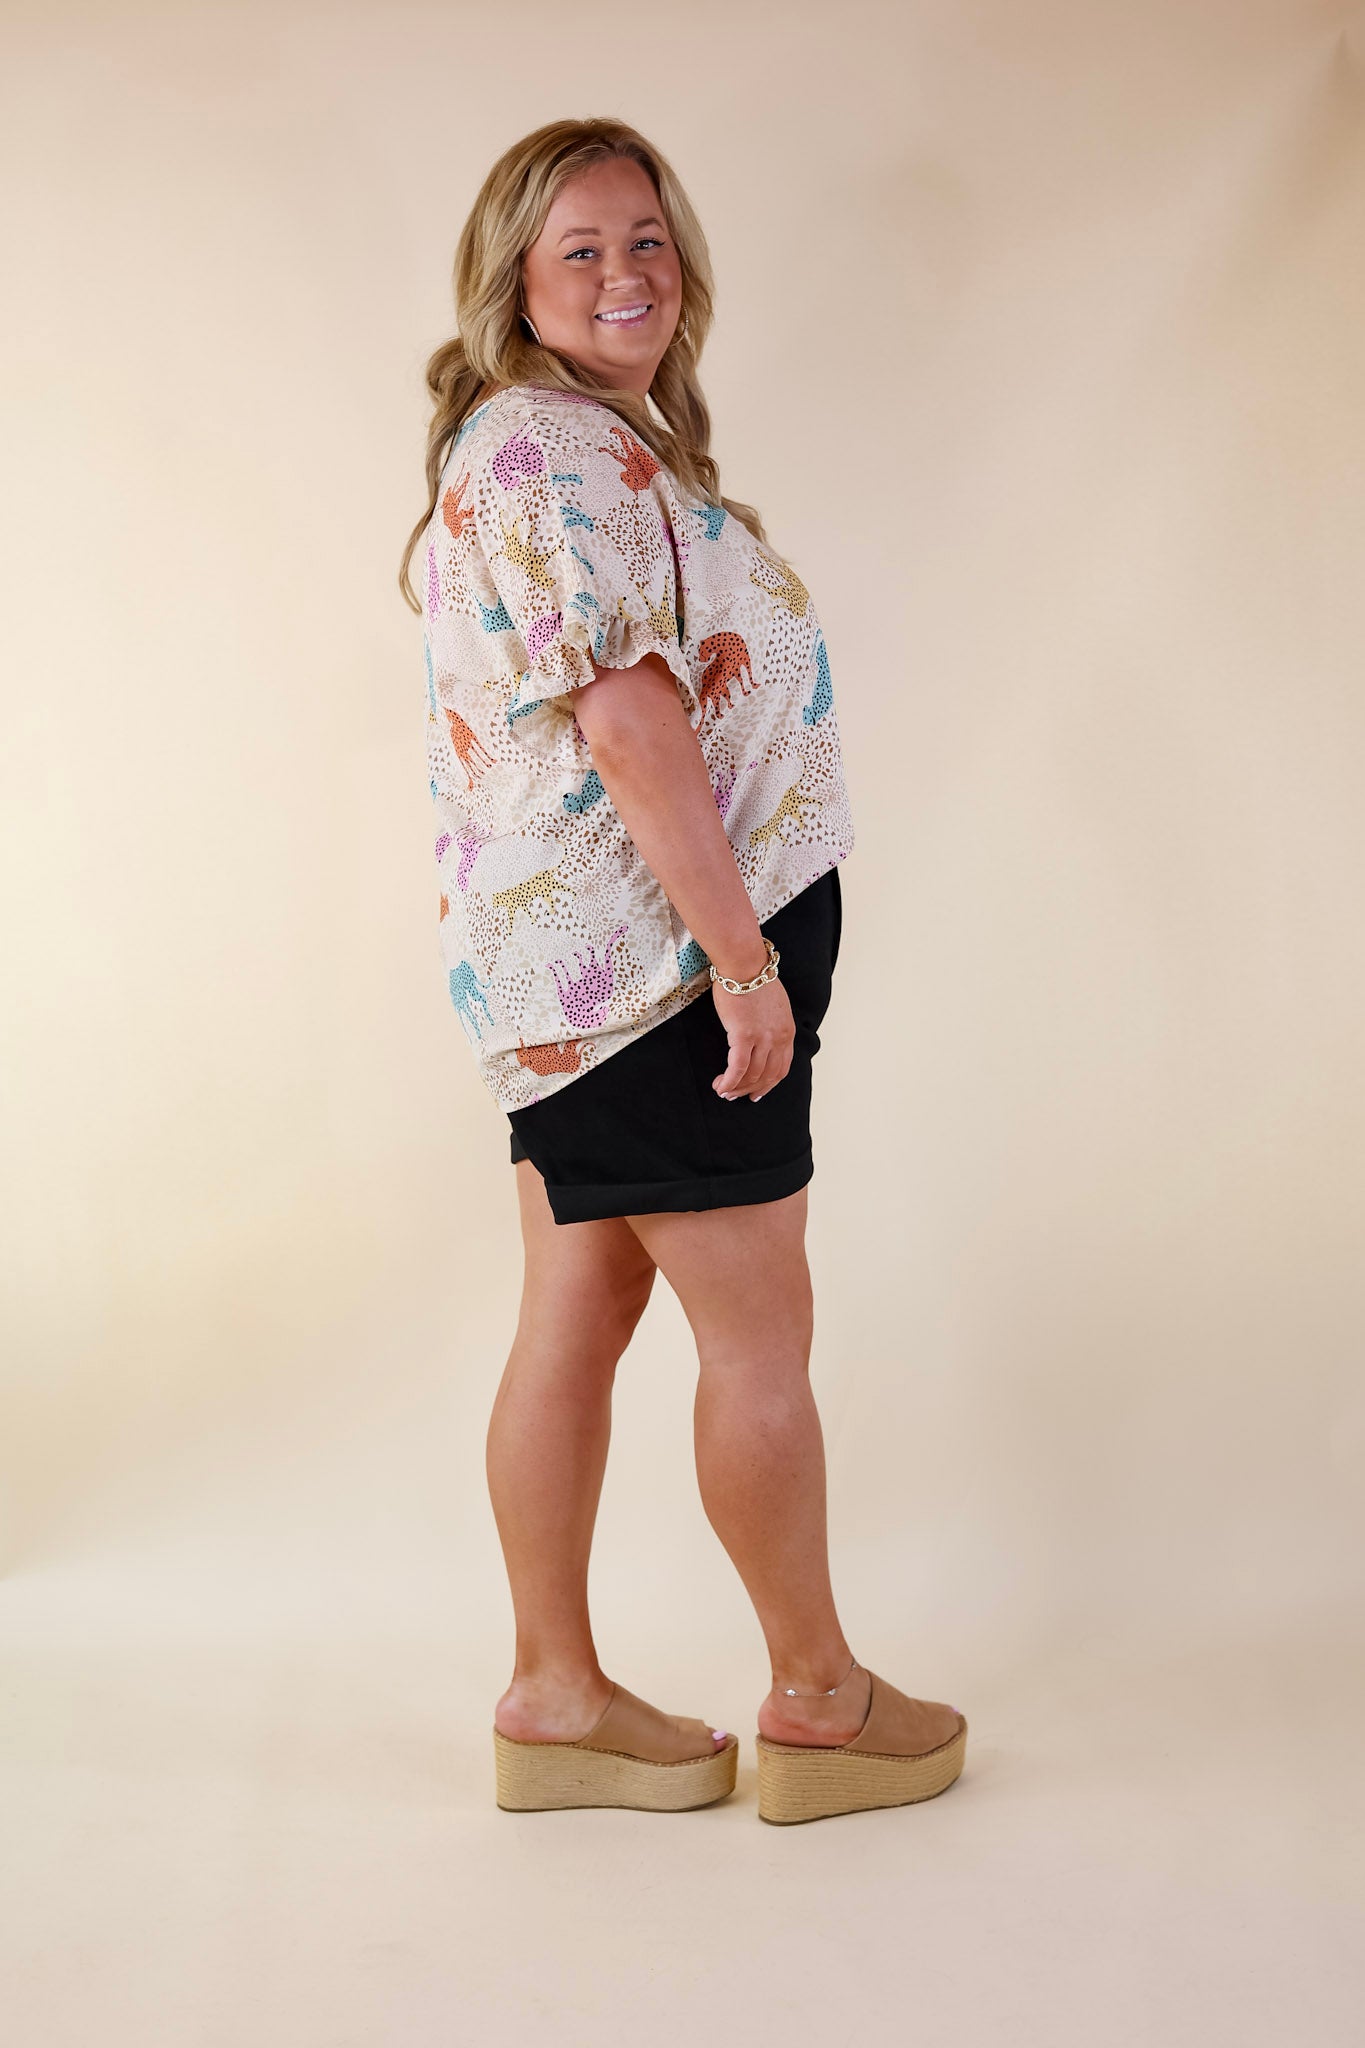 Best Version Cheetah Print V Neck Top with Ruffle Short Sleeves in Beige Mix - Giddy Up Glamour Boutique